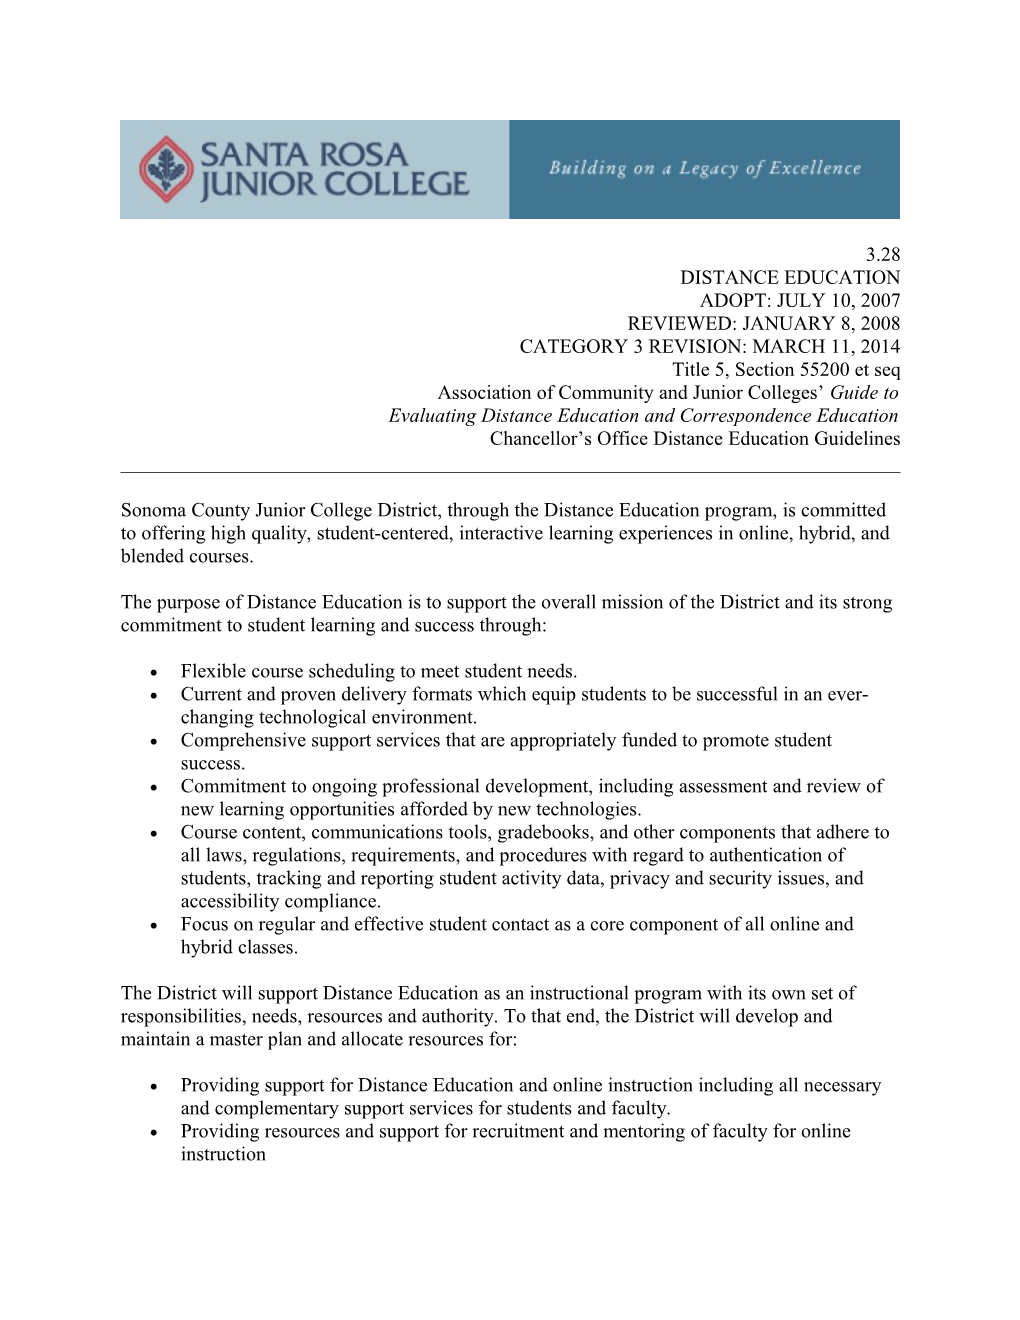 Association of Community and Junior Colleges Guide To